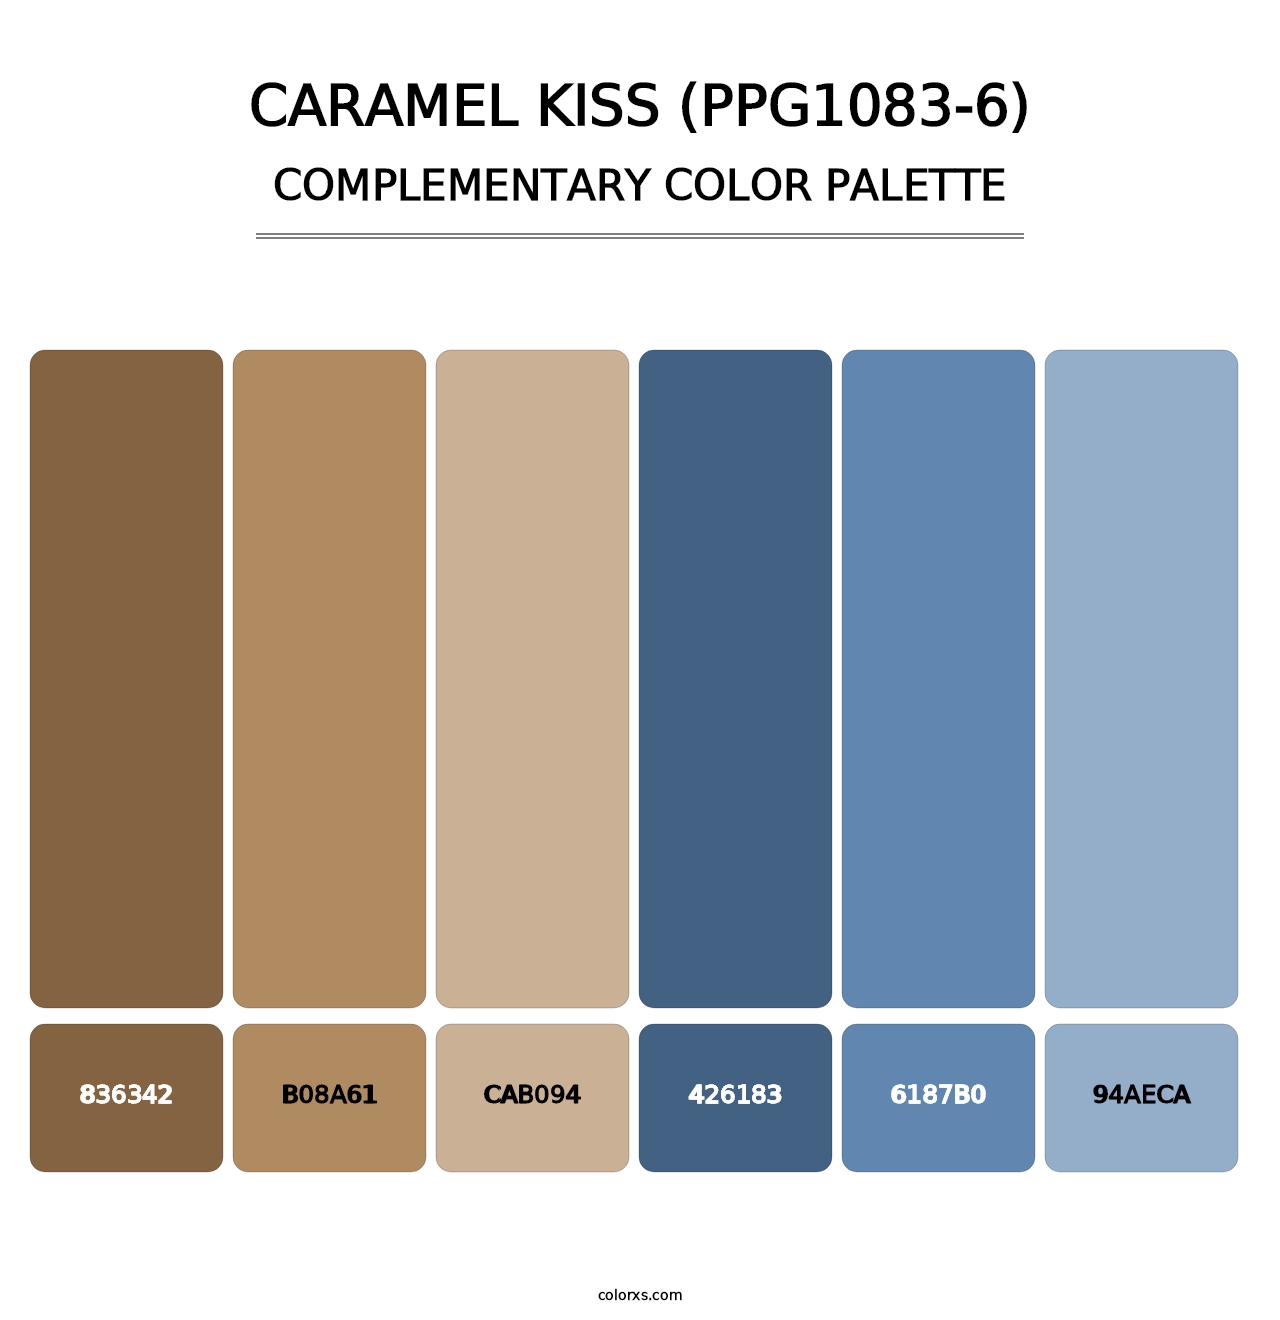 Caramel Kiss (PPG1083-6) - Complementary Color Palette